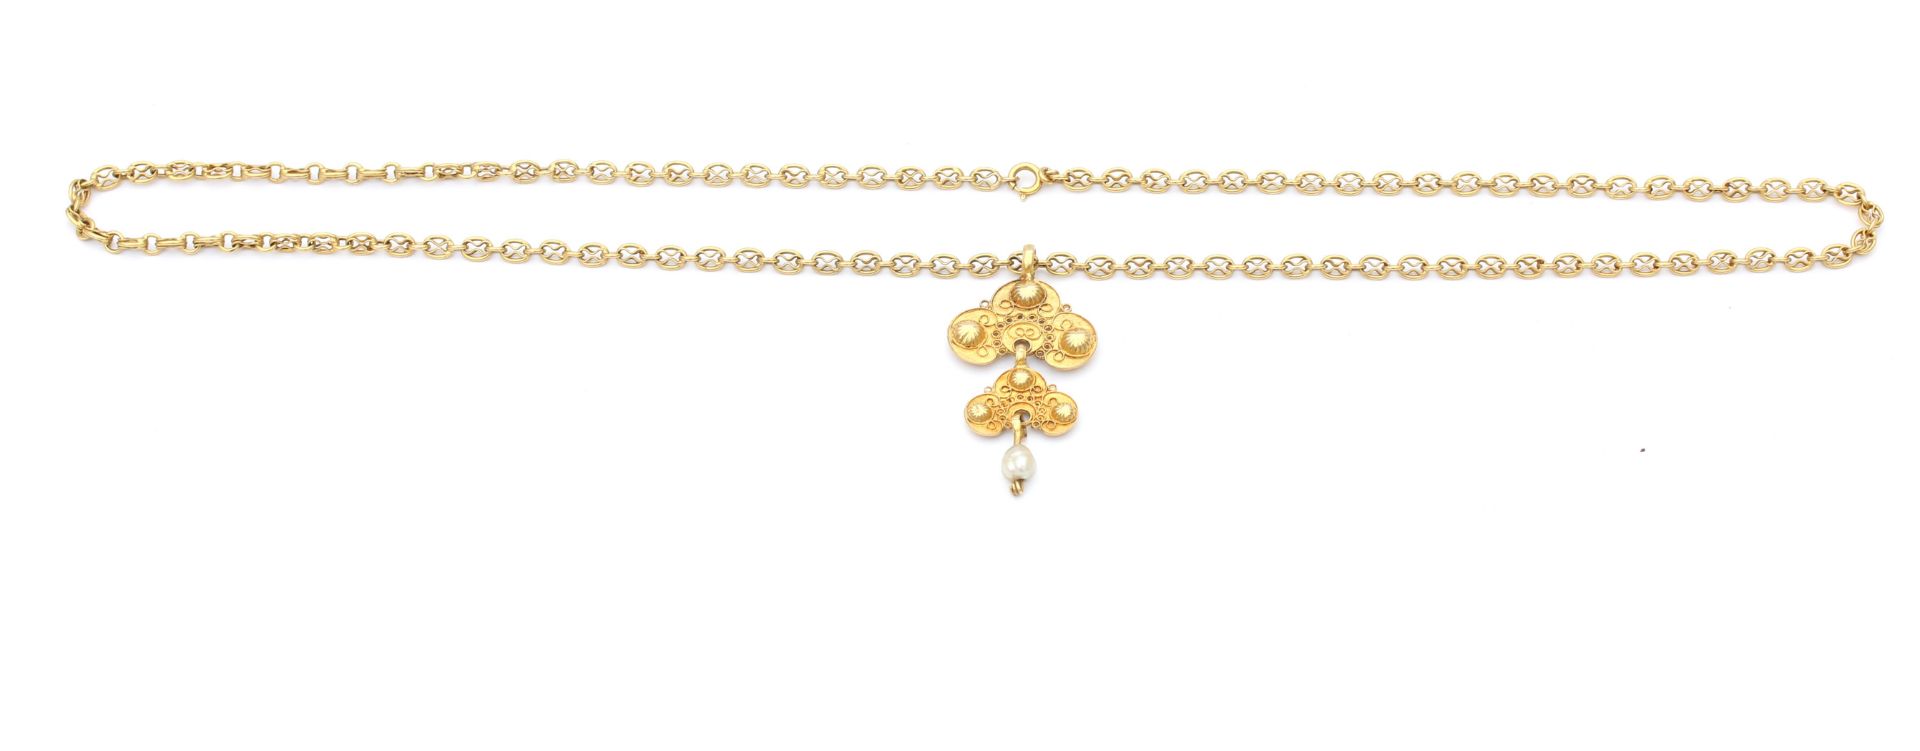 A 14 karat gold necklace with a gold filigree and pearl pendant. - Image 3 of 3